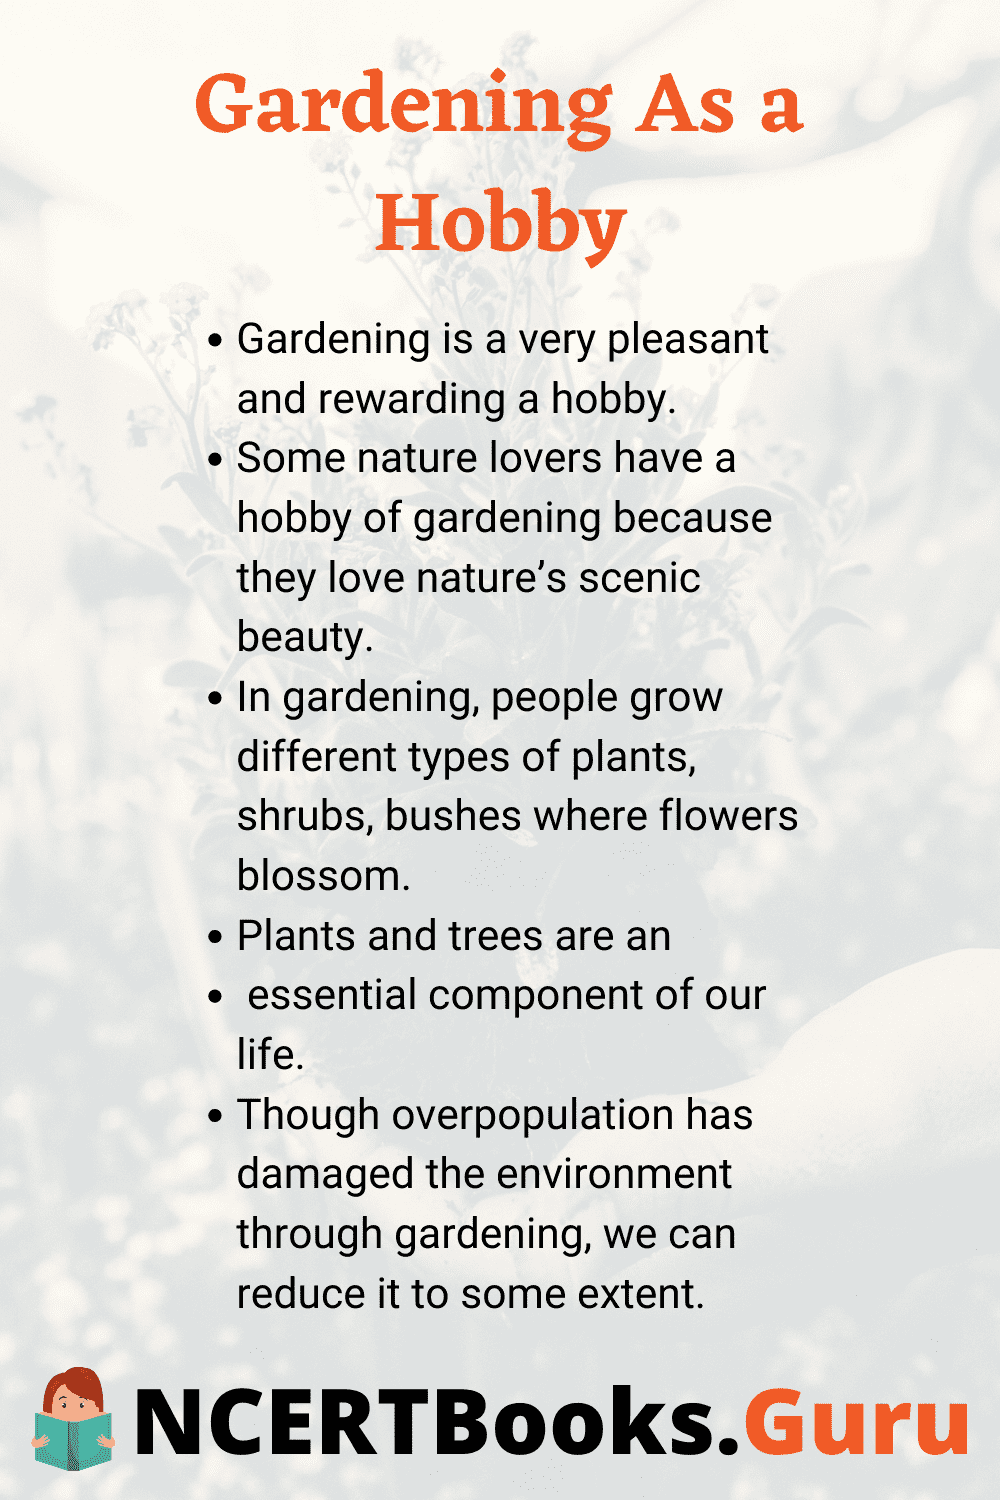 title of essay about gardening